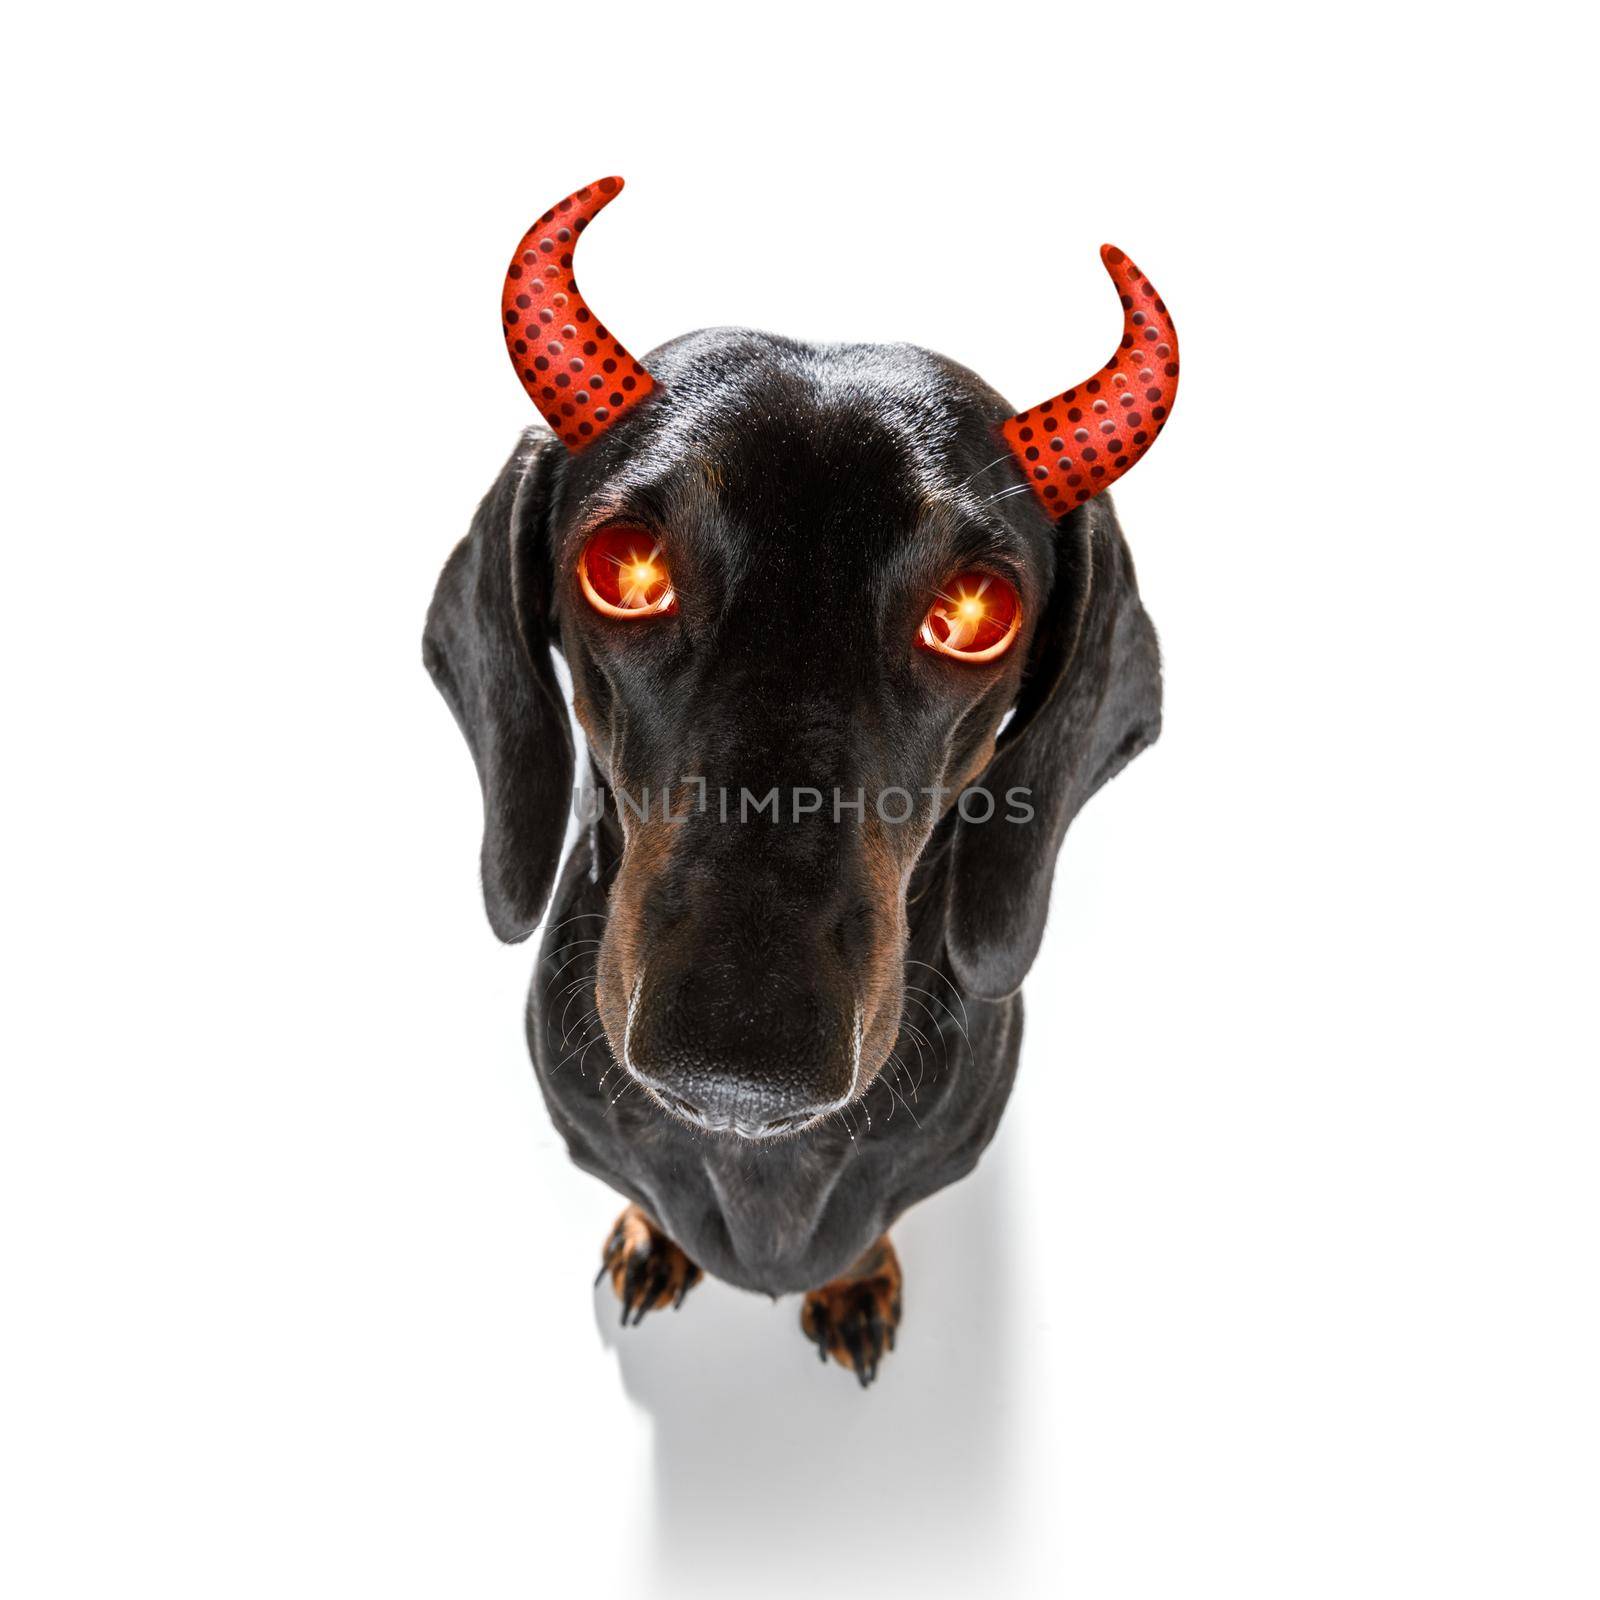 dachshund sausage dog sit as a ghost for halloween sitting   scary and spooky glowing eyes , isolated on white background